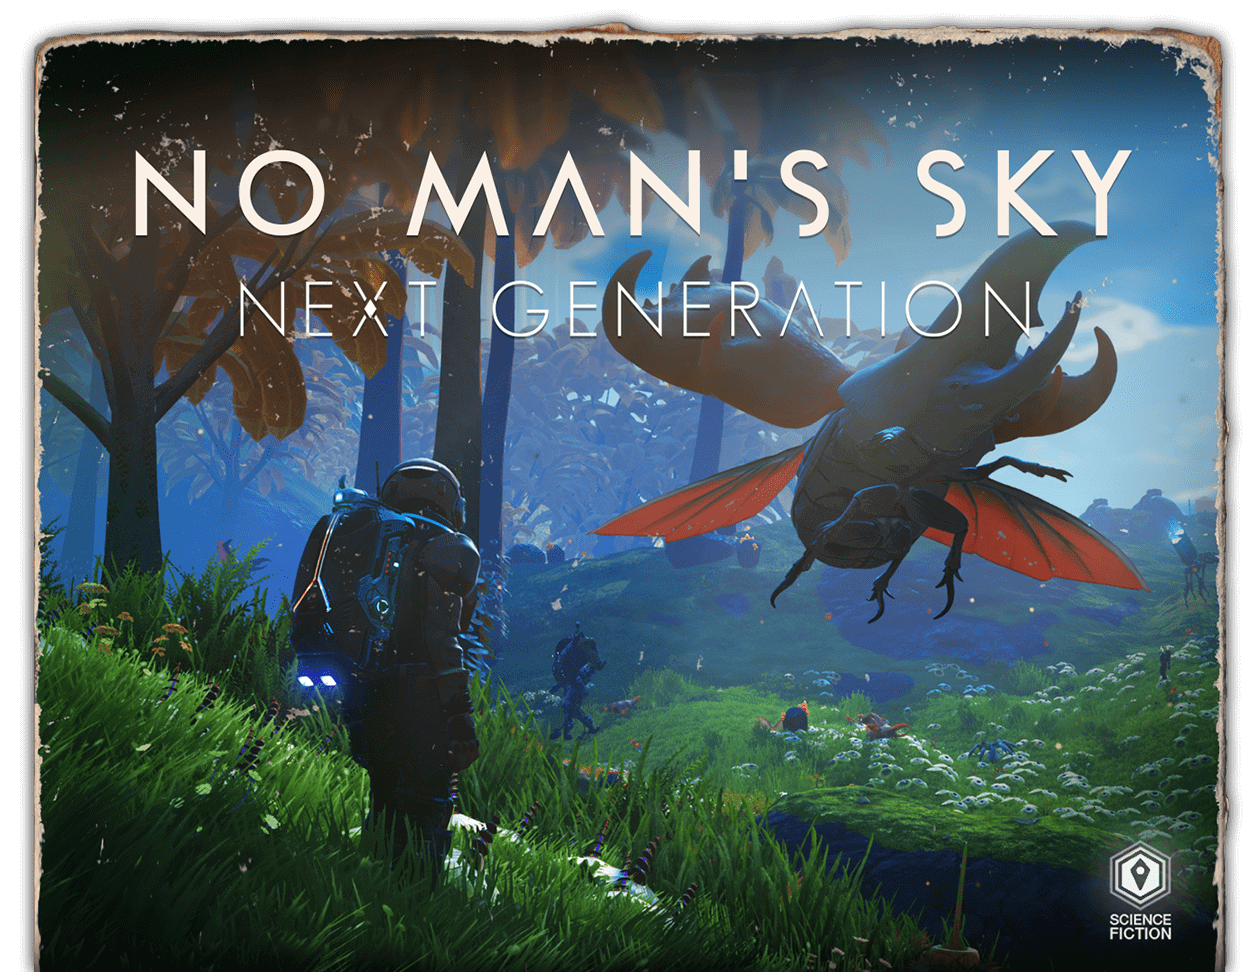 No Man's Sky Next Generation brings the epic space sandbox to PS5 and XBSX